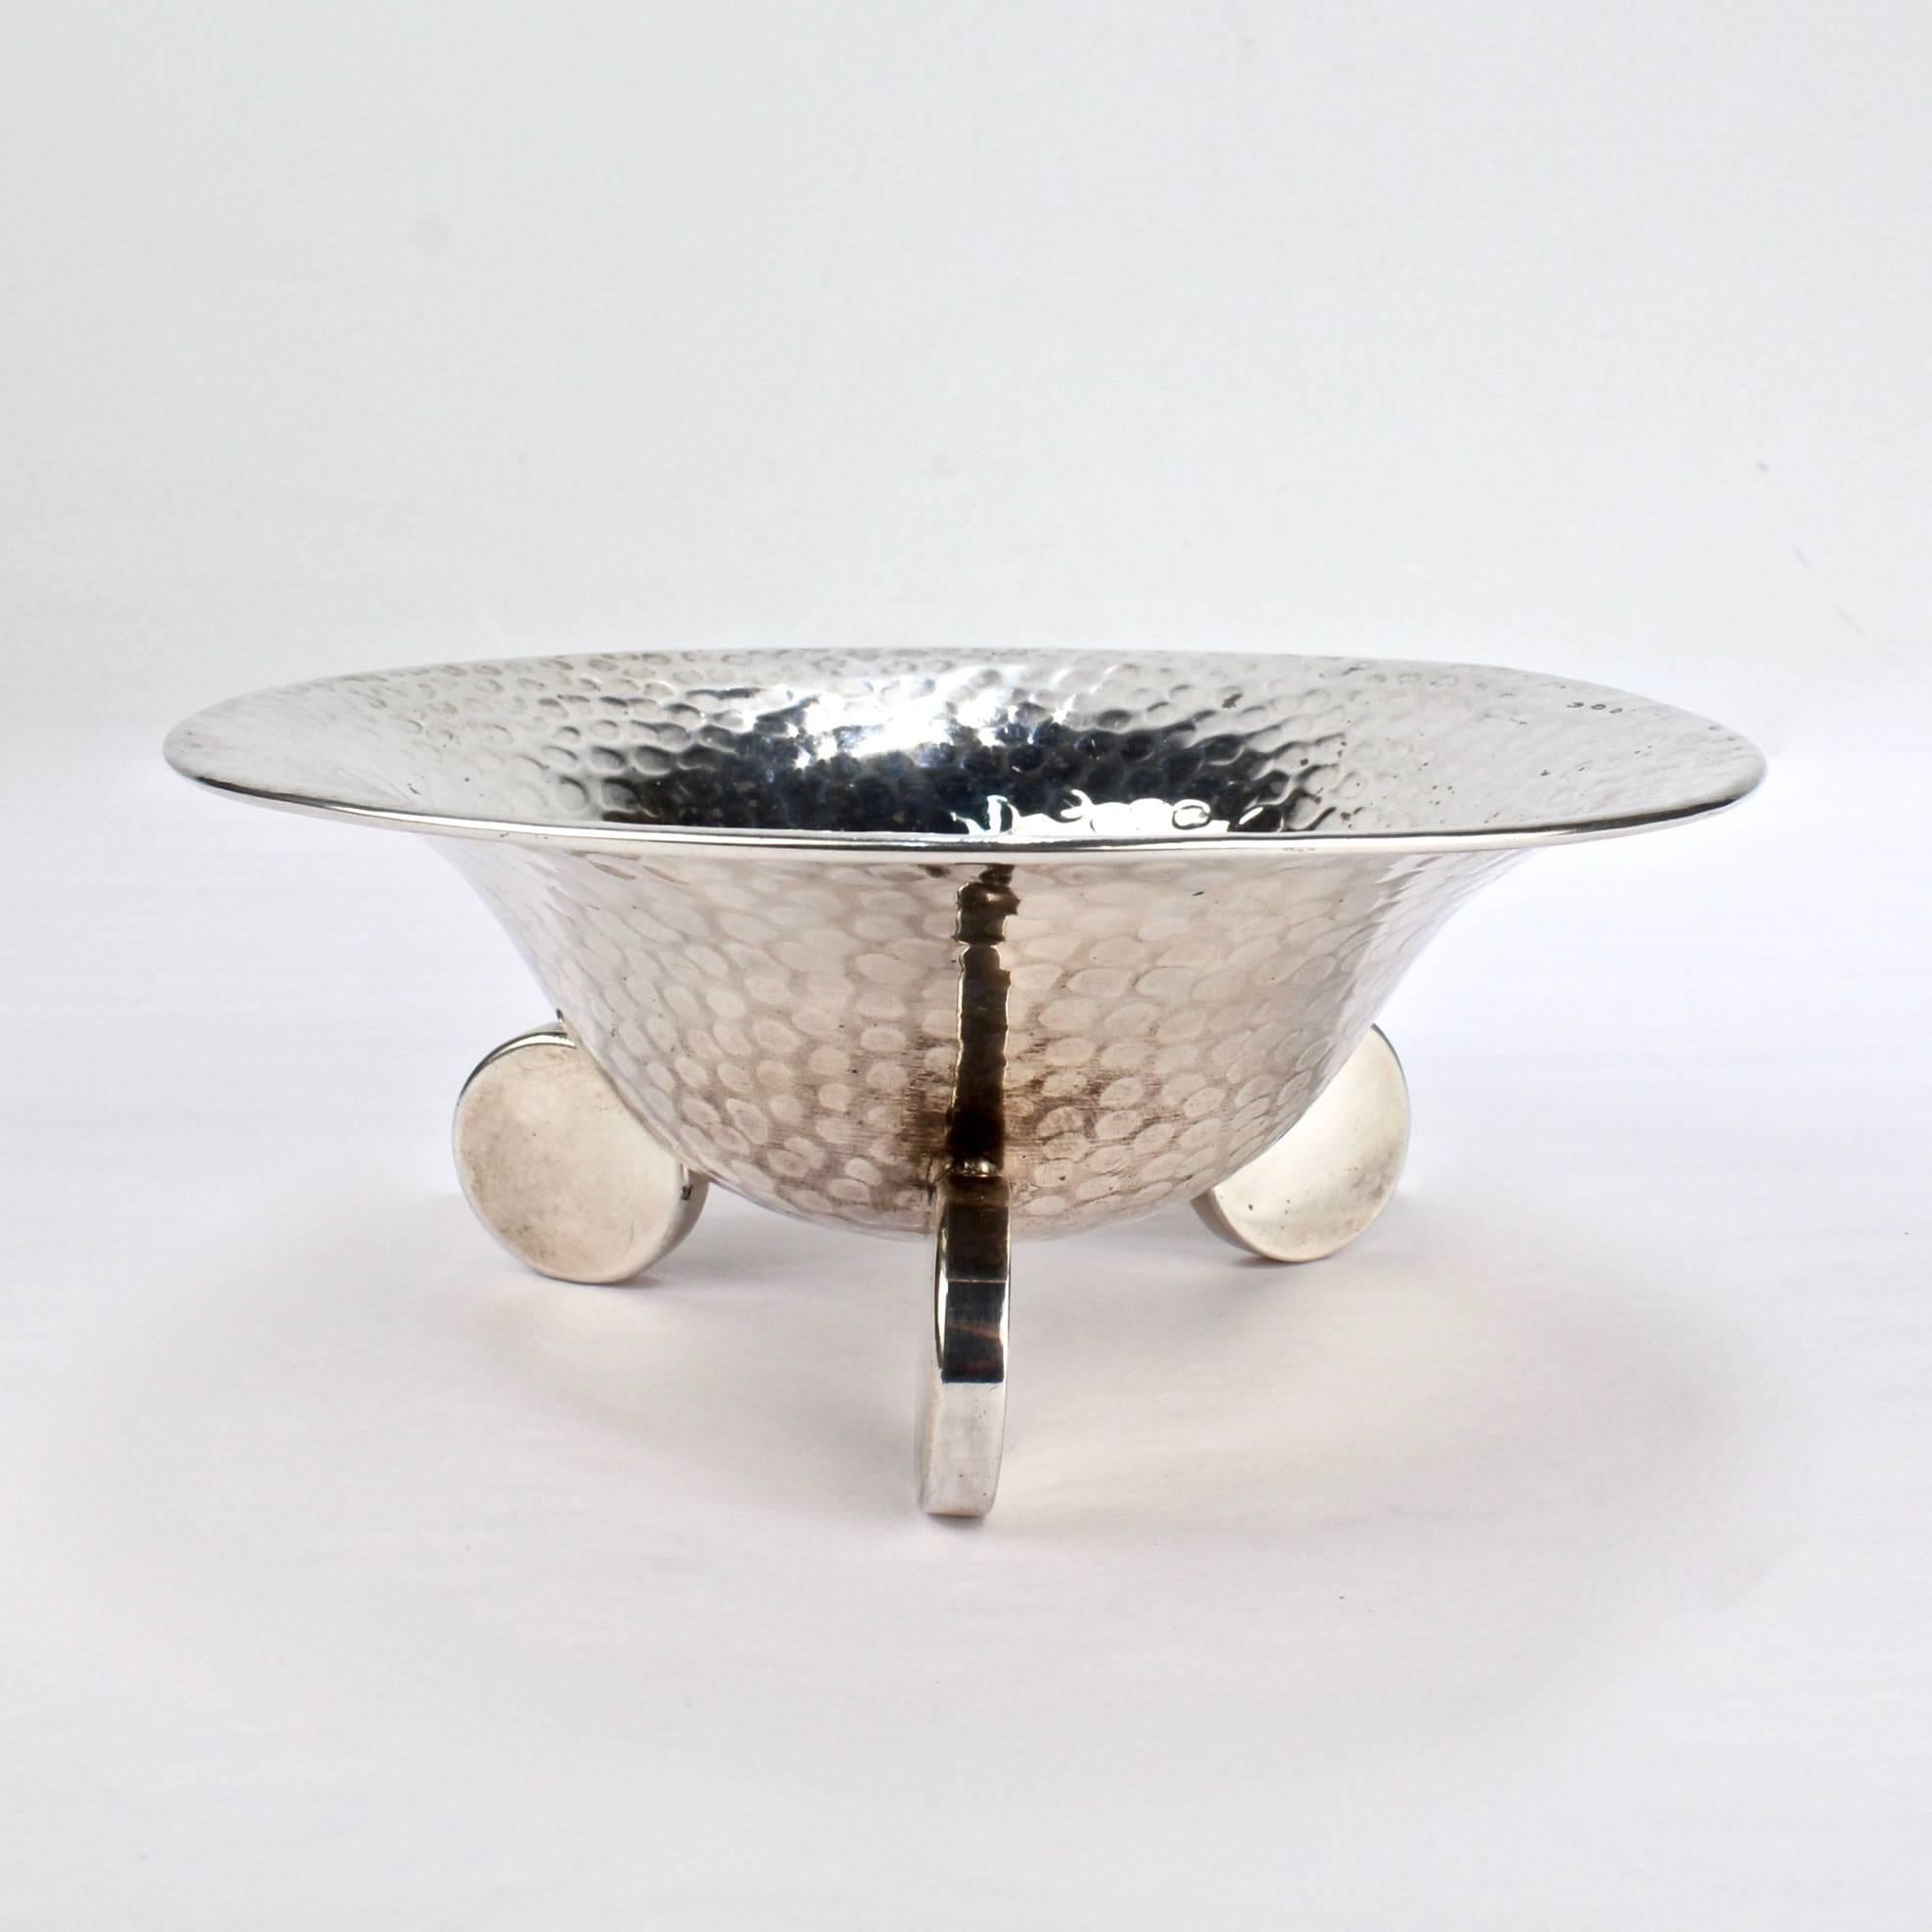 A fine Art Deco 800 silver bowl.

With hand-hammered bowl supported by three disc-shaped tab feet. 

Interior rim hallmarked for .800 silver fineness, Krakow Poland, and with WH maker's mark.

Measure: Diameter ca. 6 3/8 in.
Weight ca. 180